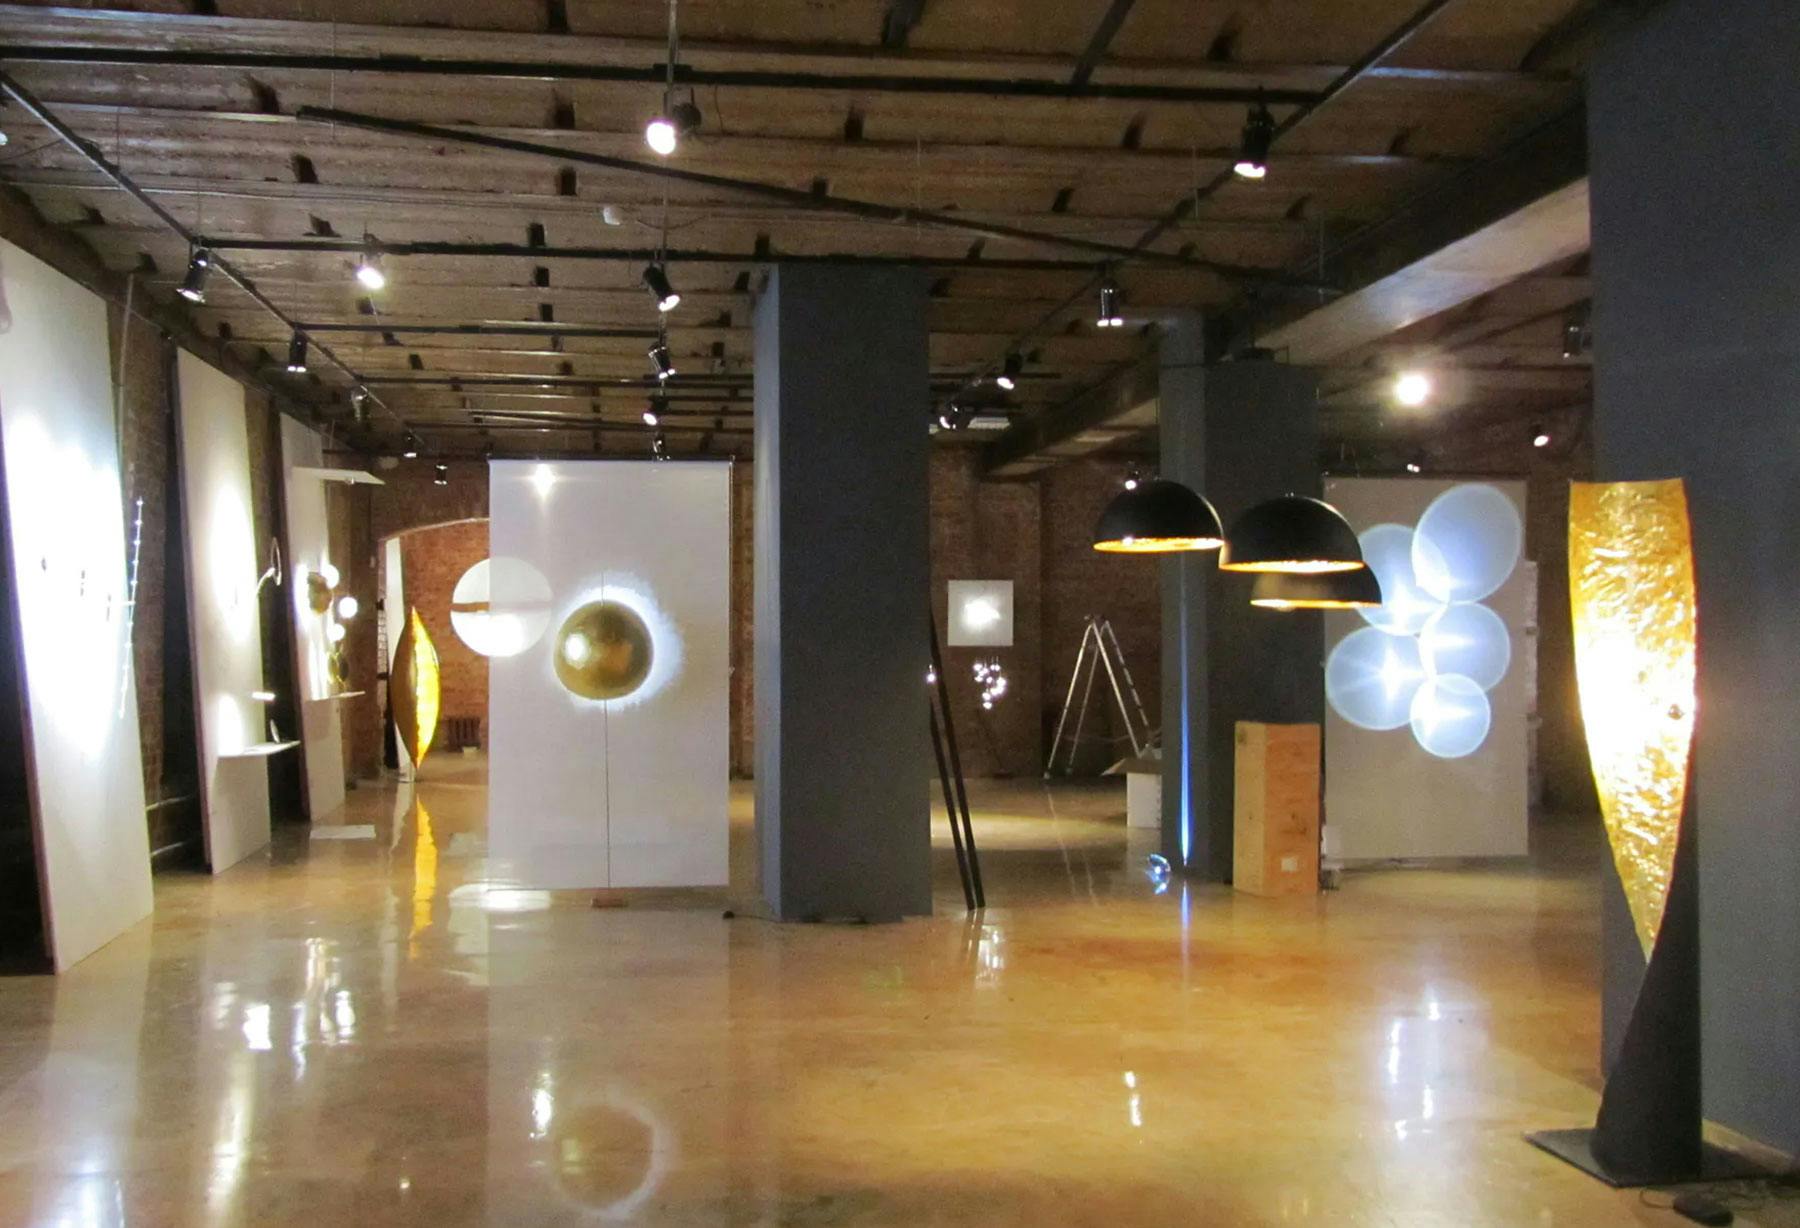 <p>Enzo Catellani is guest of honor at an event held in St. Petersburg, where he presents the Eco-Logic Light collection, in the presence of numerous journalists, representatives of the most important magazines specialized in design and furniture, and of some Russian televisions’ reporters.</p>
